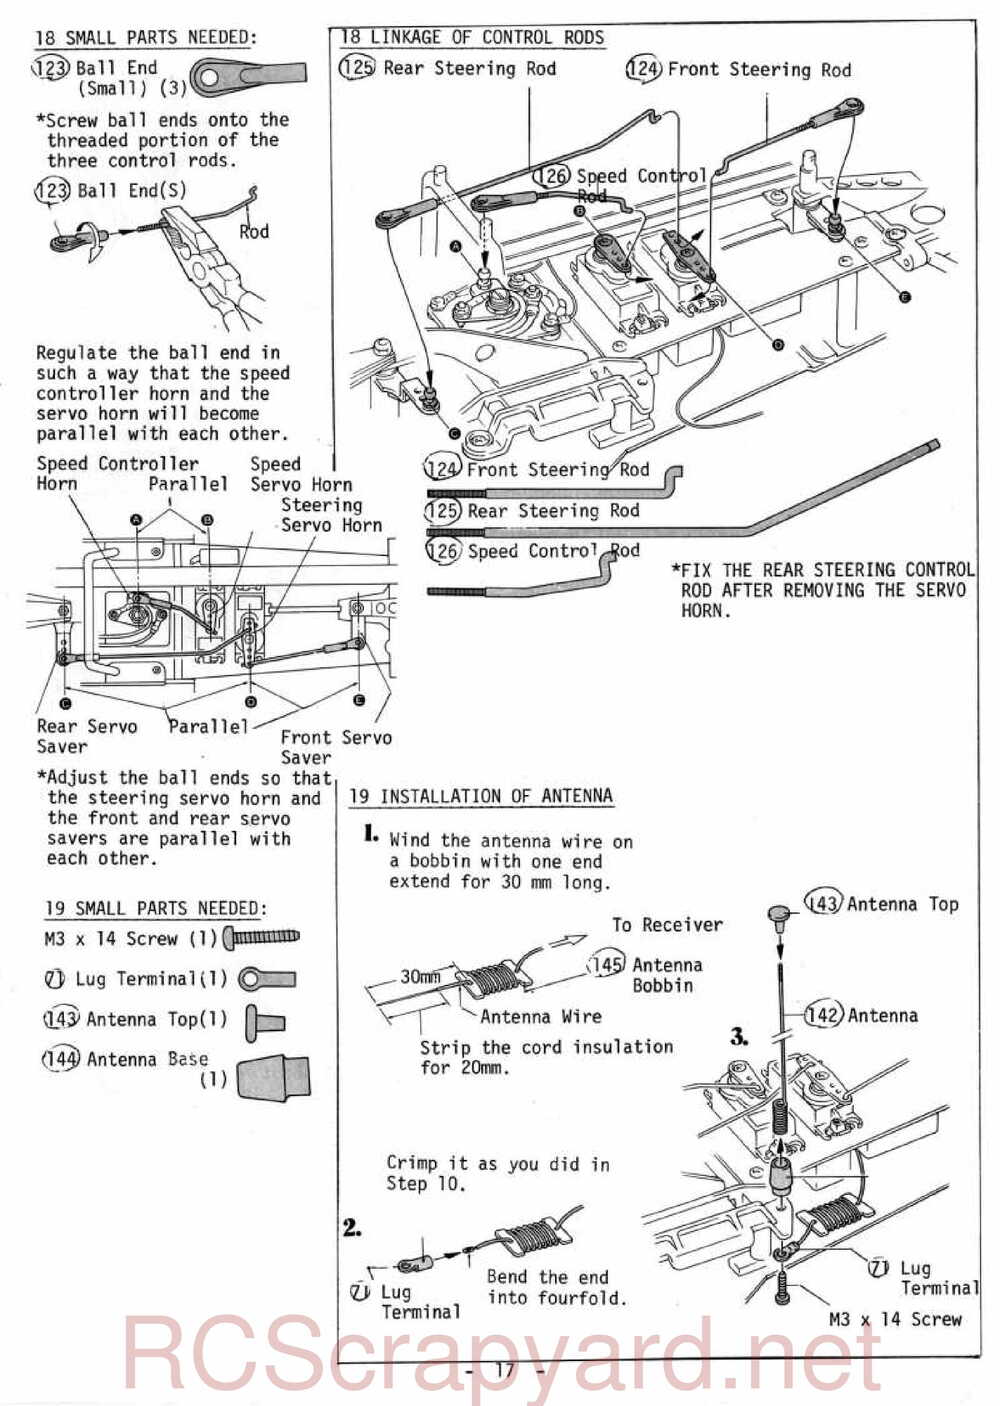 Kyosho - 3069 - Gallop MkII - Manual - Page 17